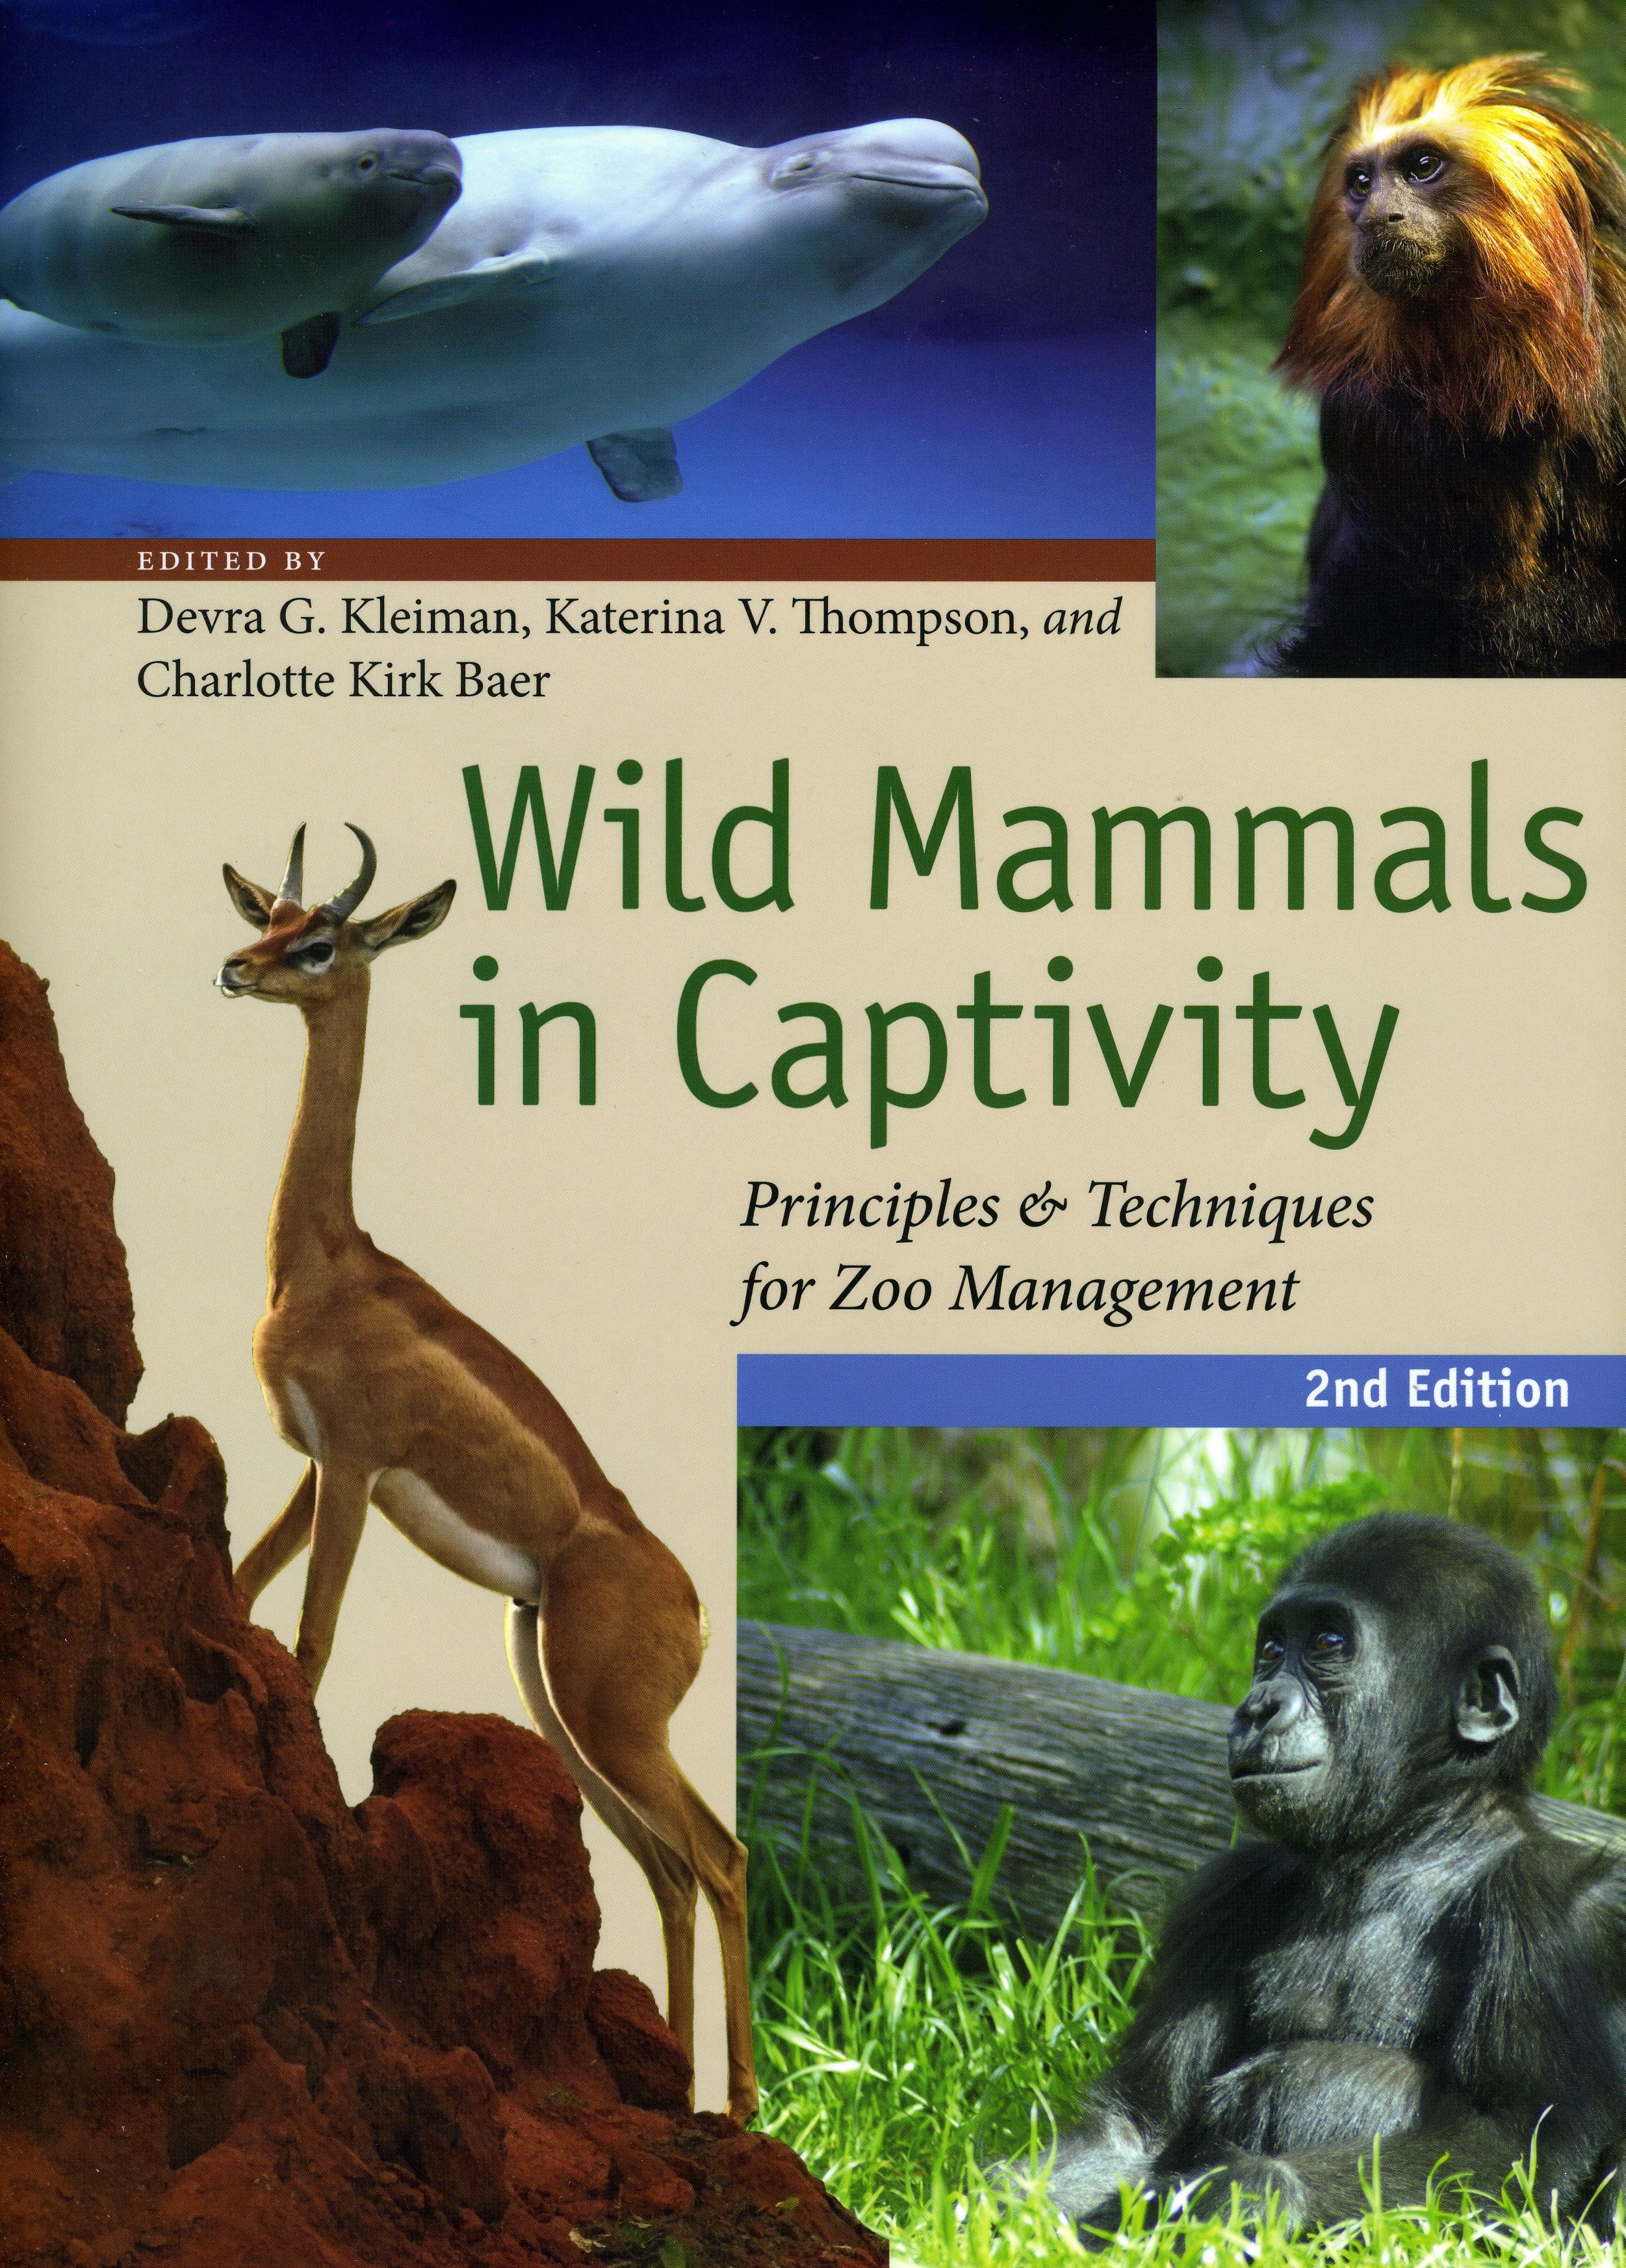 Wild Mammals in Captivity: Principles and Techniques for Zoo Management,  Second Edition, Kleiman, Thompson, Baer